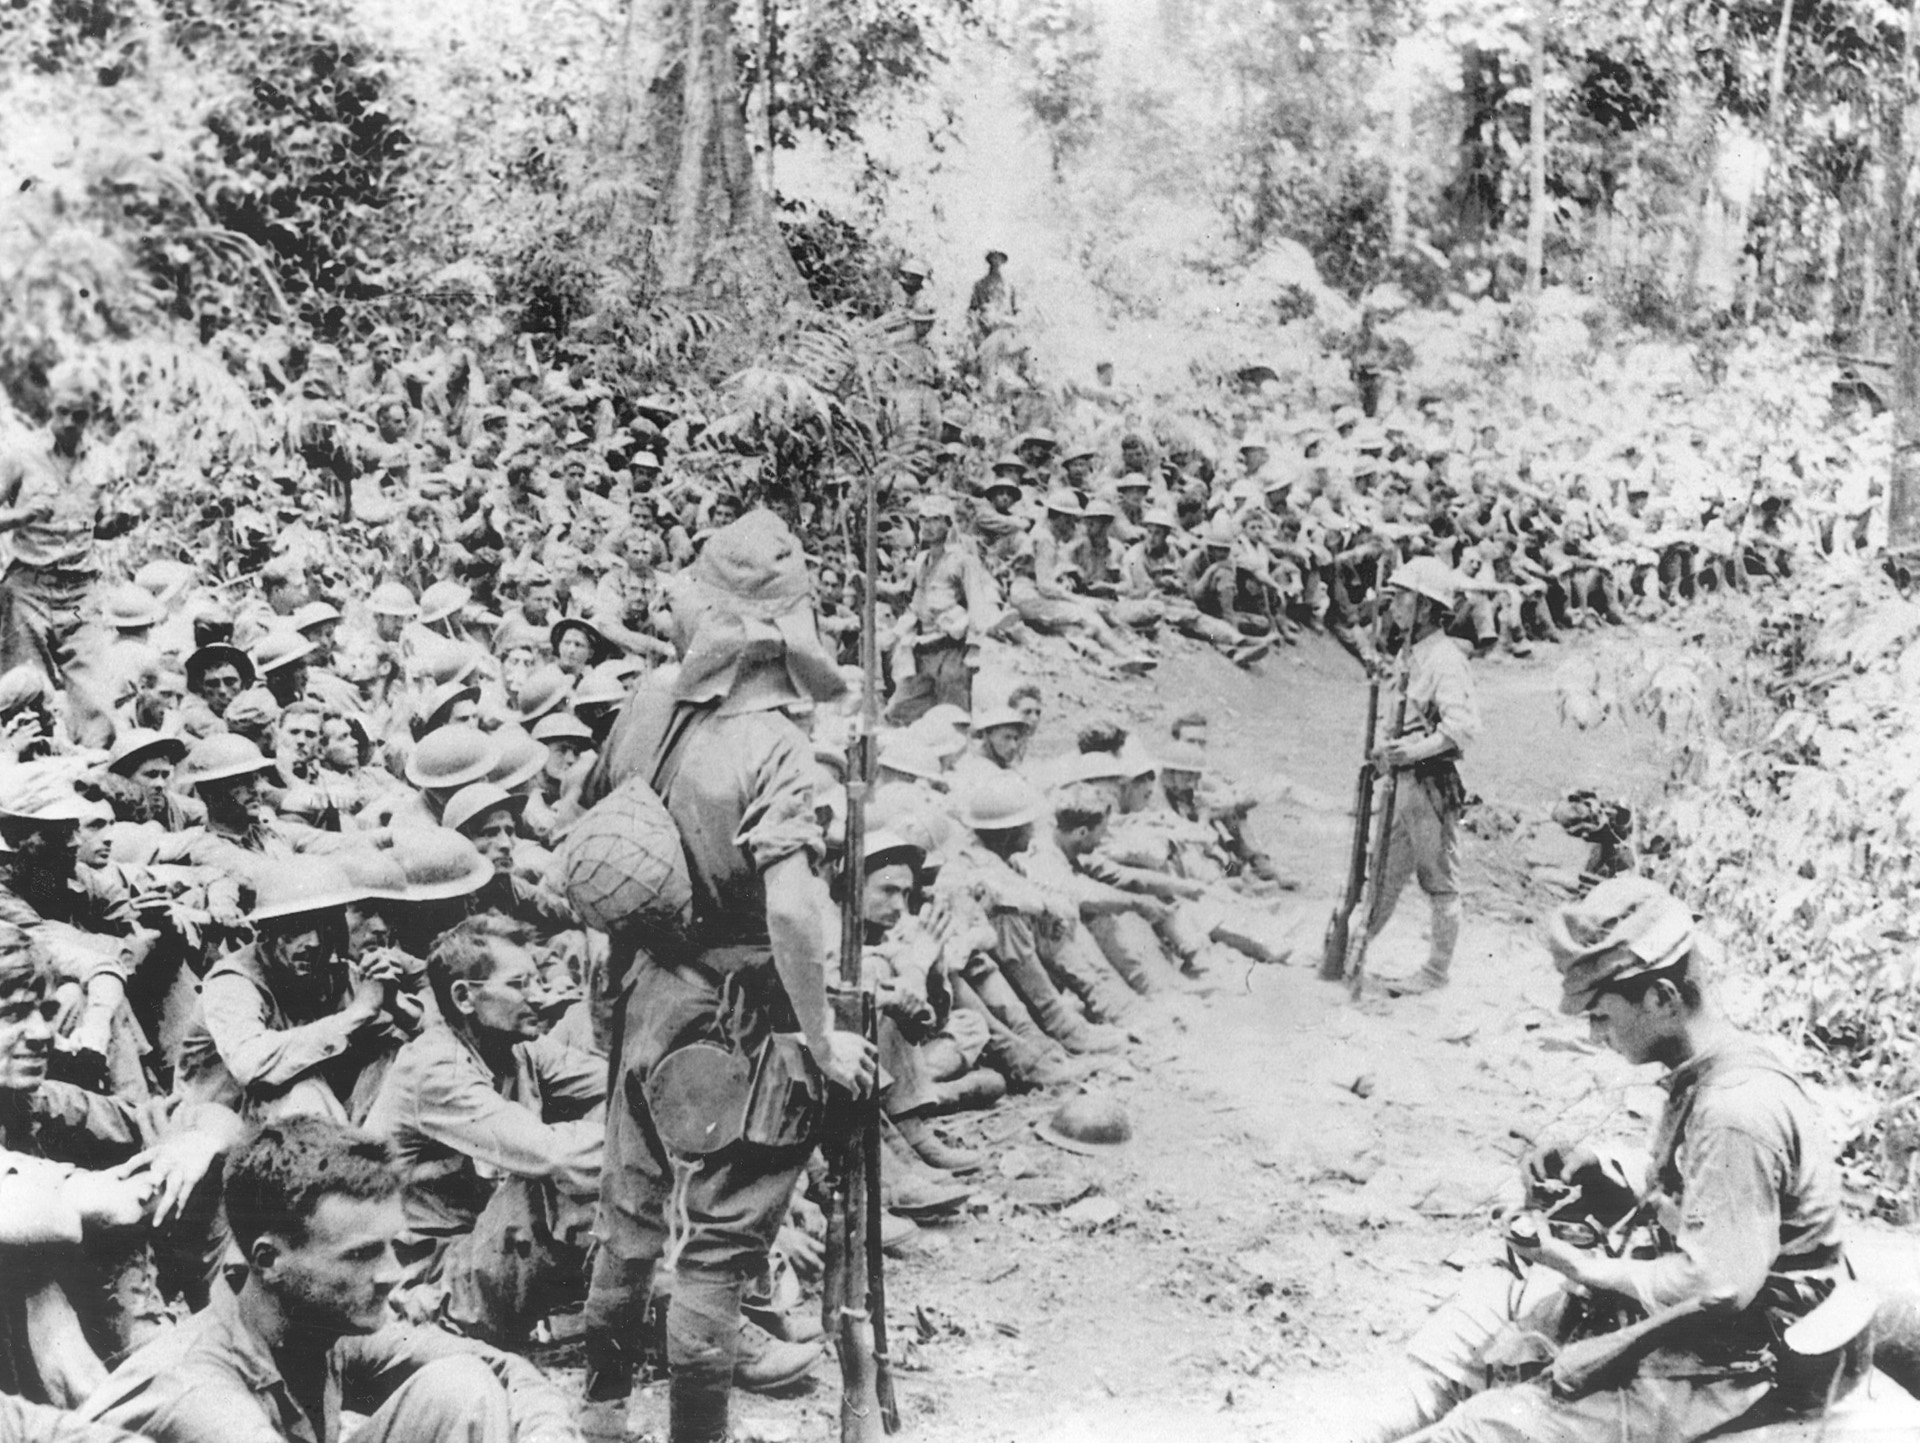 Under heavy Japanese guard, American captives sit along a dusty Philippine path and await instructions from their captors.